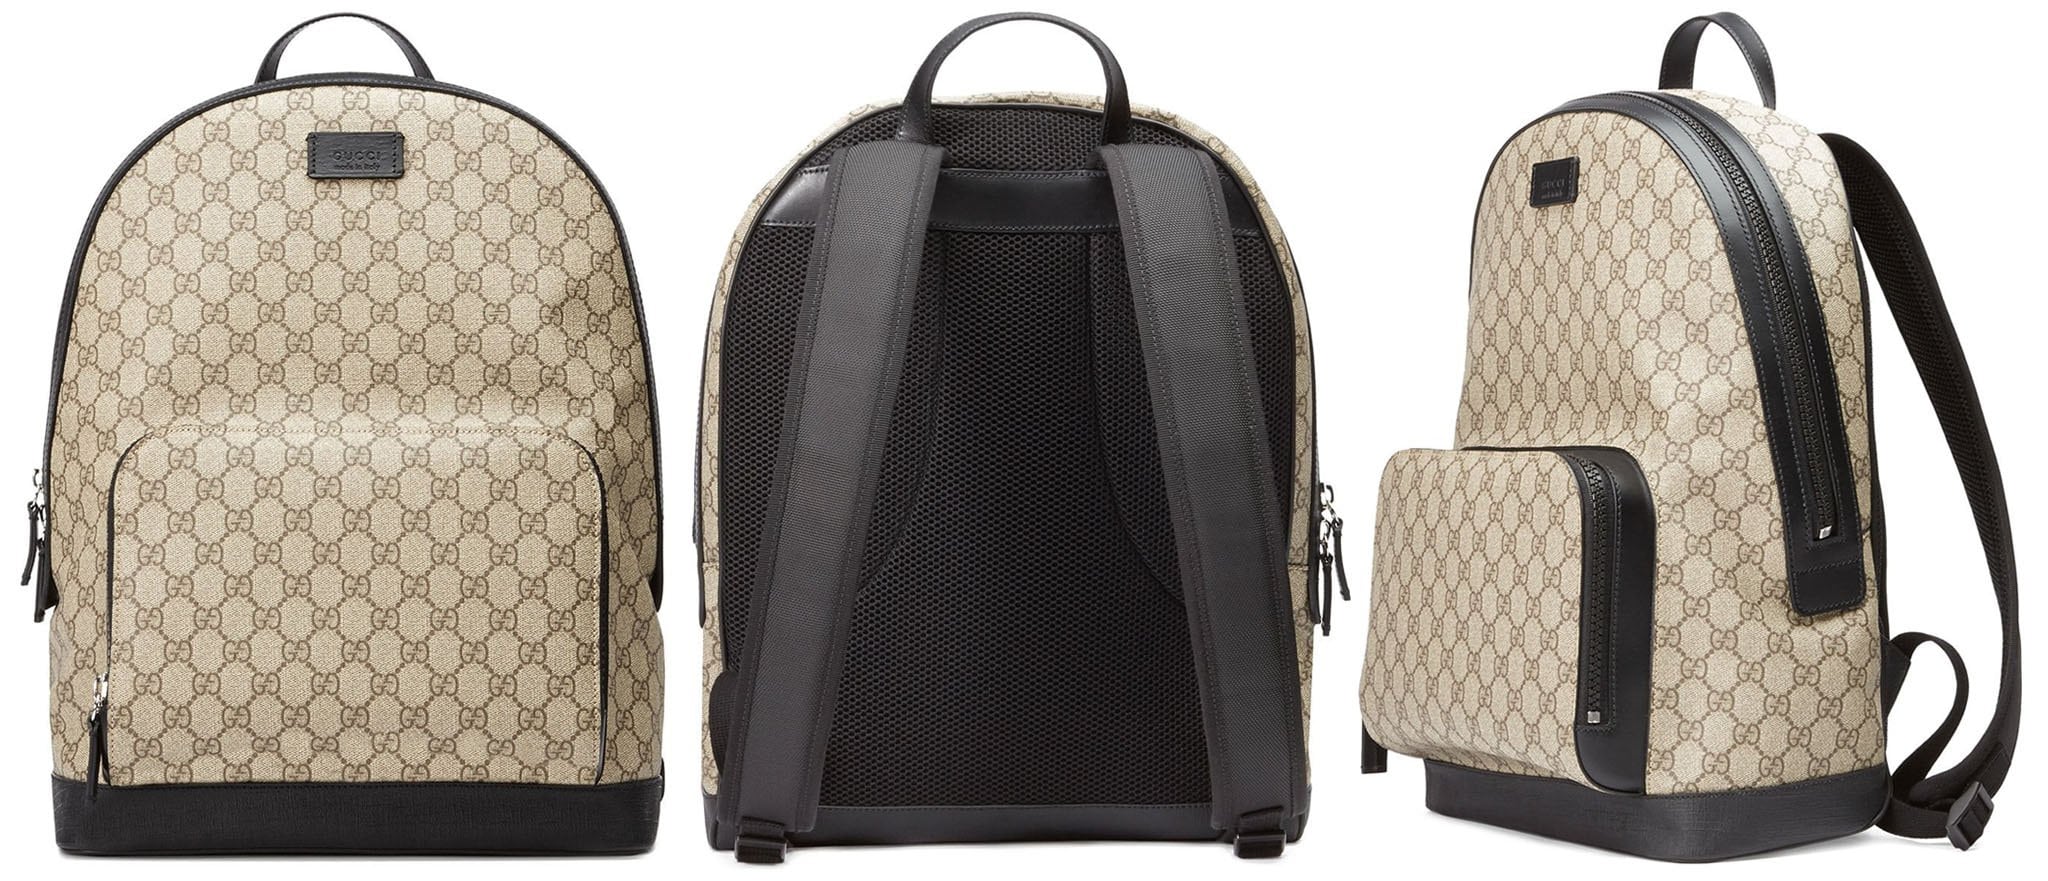 A practical high-end backpack from Gucci made of monogrammed canvas with leather trims and a mesh back